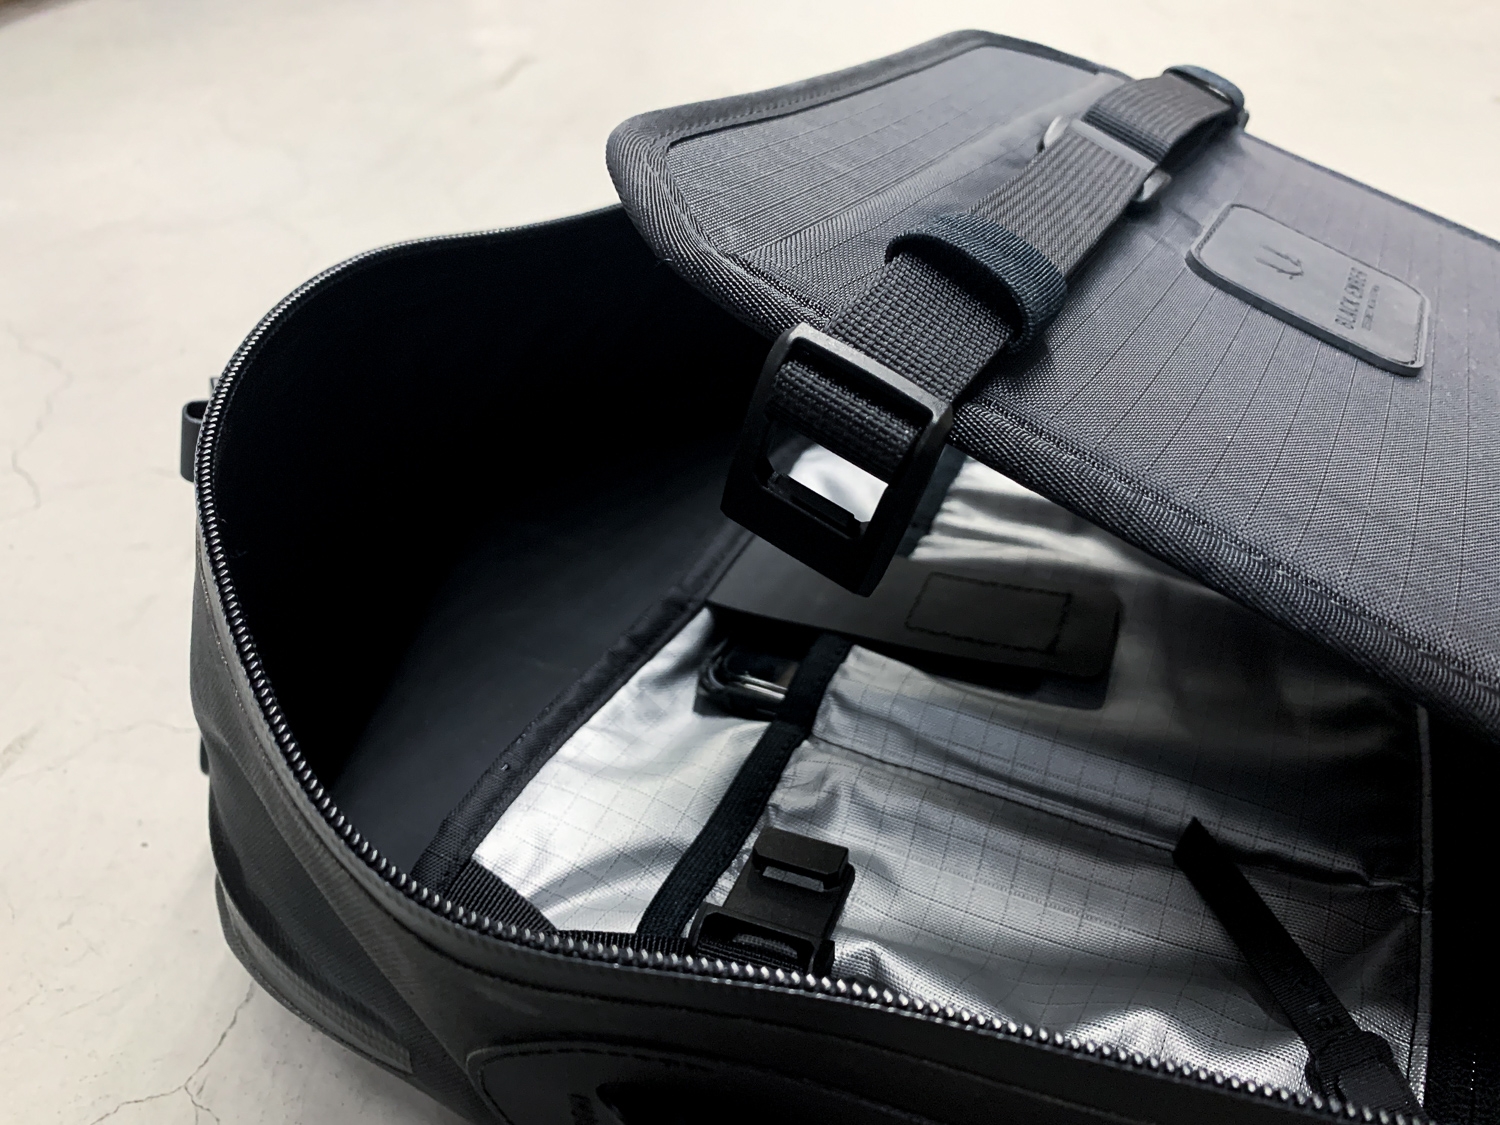 The black minimalist backpack comes from Black Ember with a compression divider to keep things flat and organized.